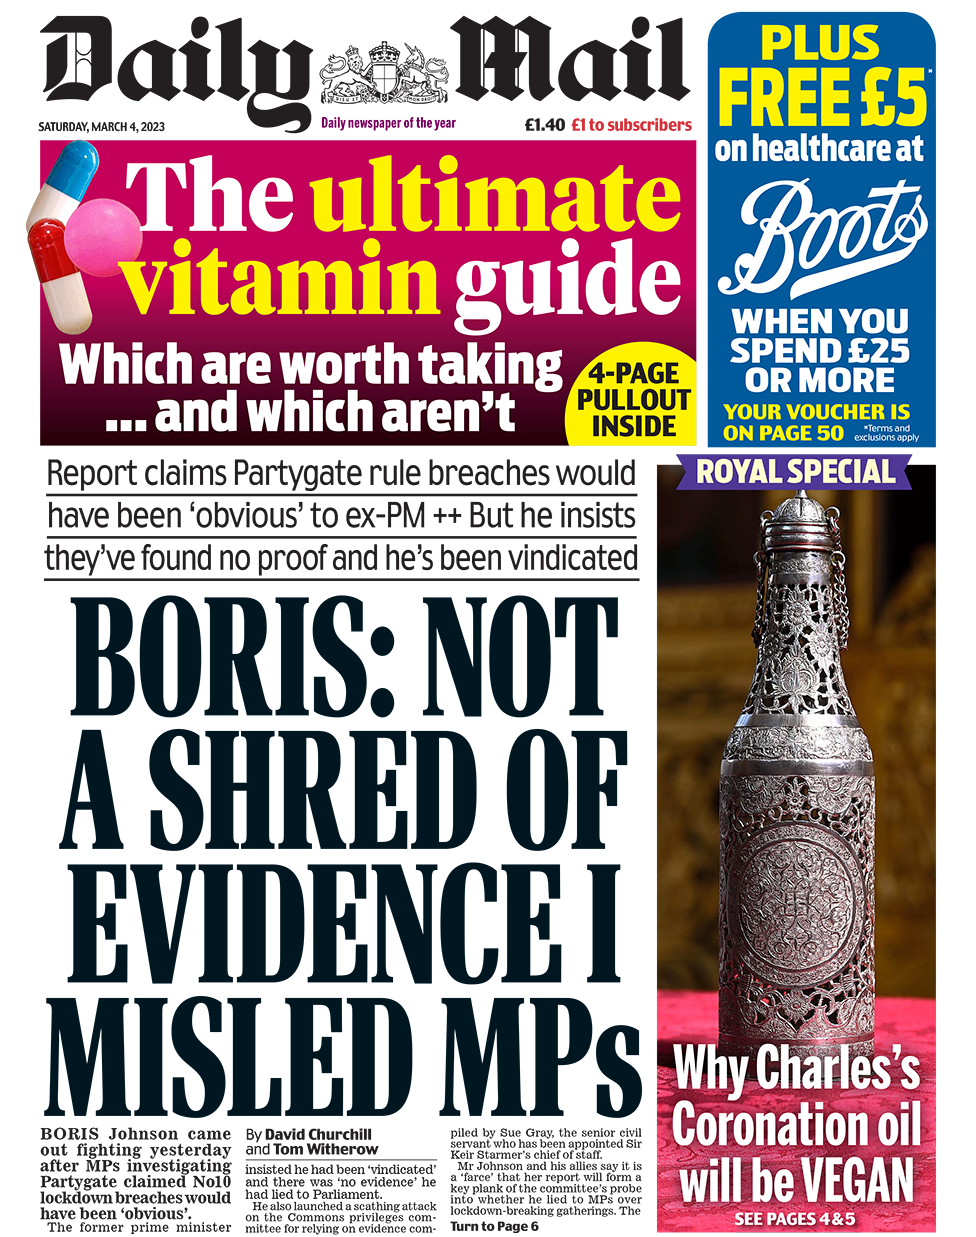 The headline in the Daily Mail reads: Boris: Not a shred of evidence I misled MPs